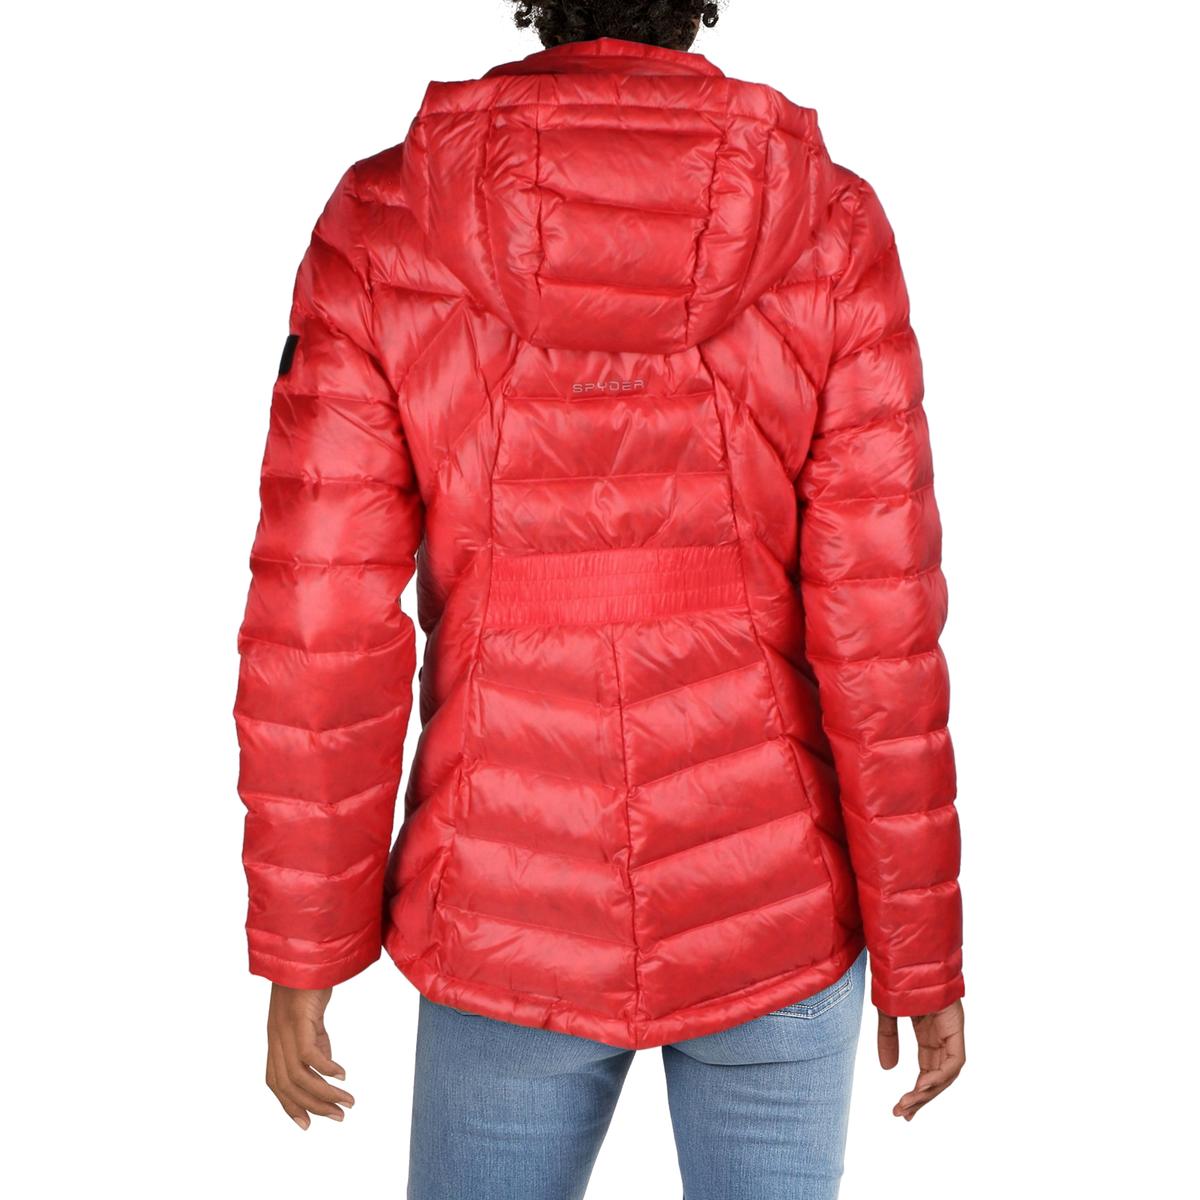 Spyder Womens Syrround Hoody Down Quilted Jacket Puffer Coat Outerwear ...